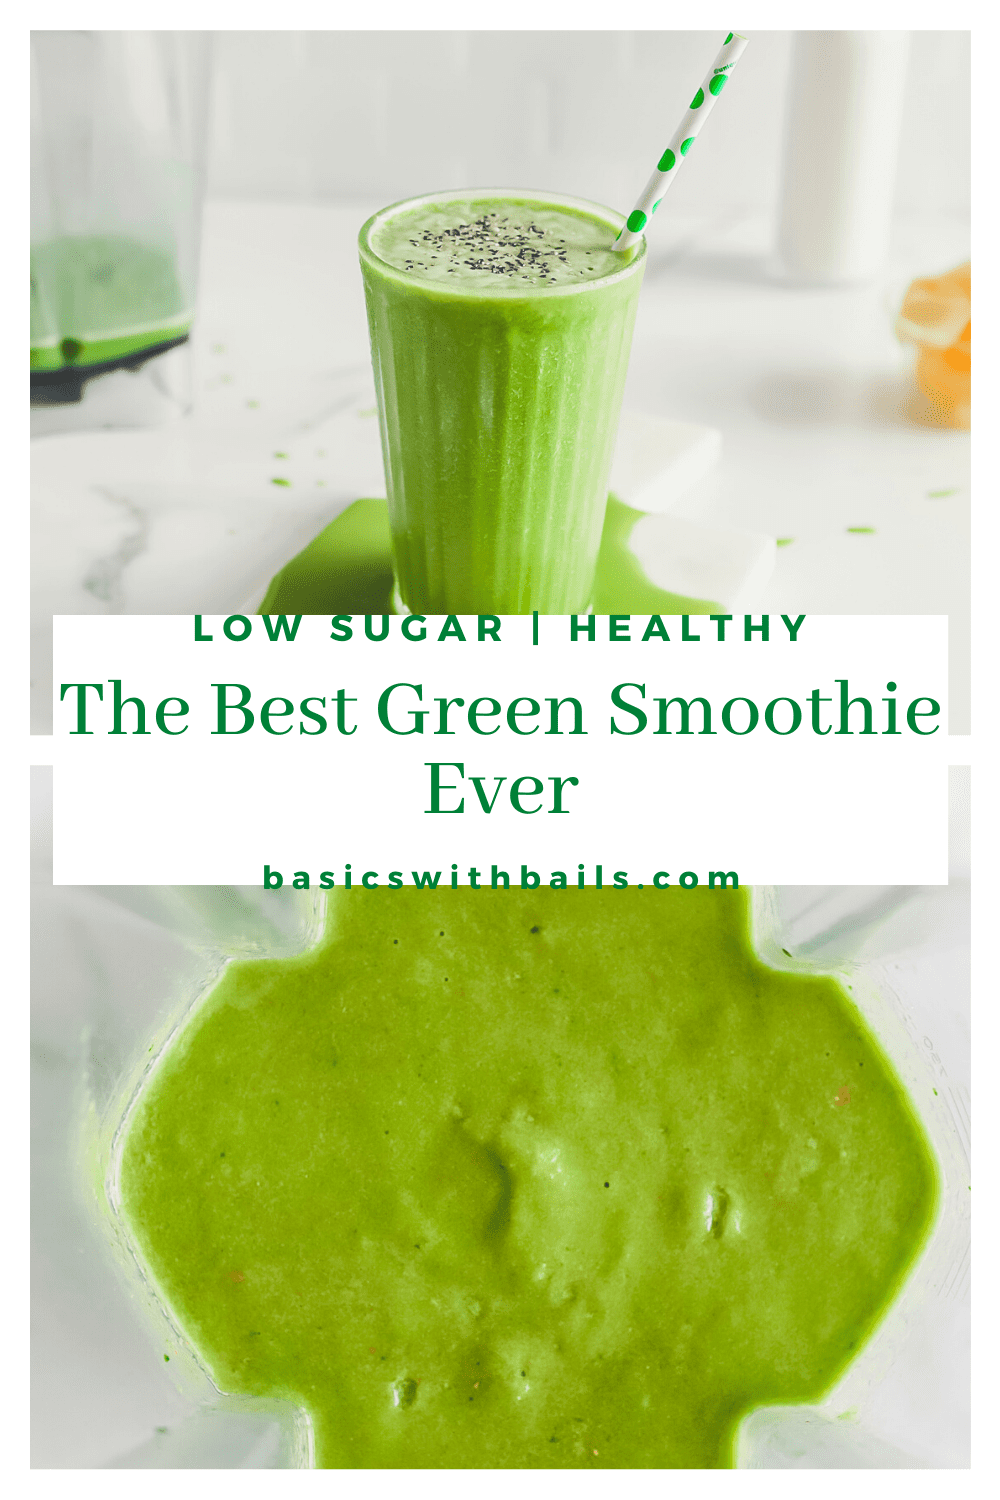 The Best Green Smoothie – Basics with Bails